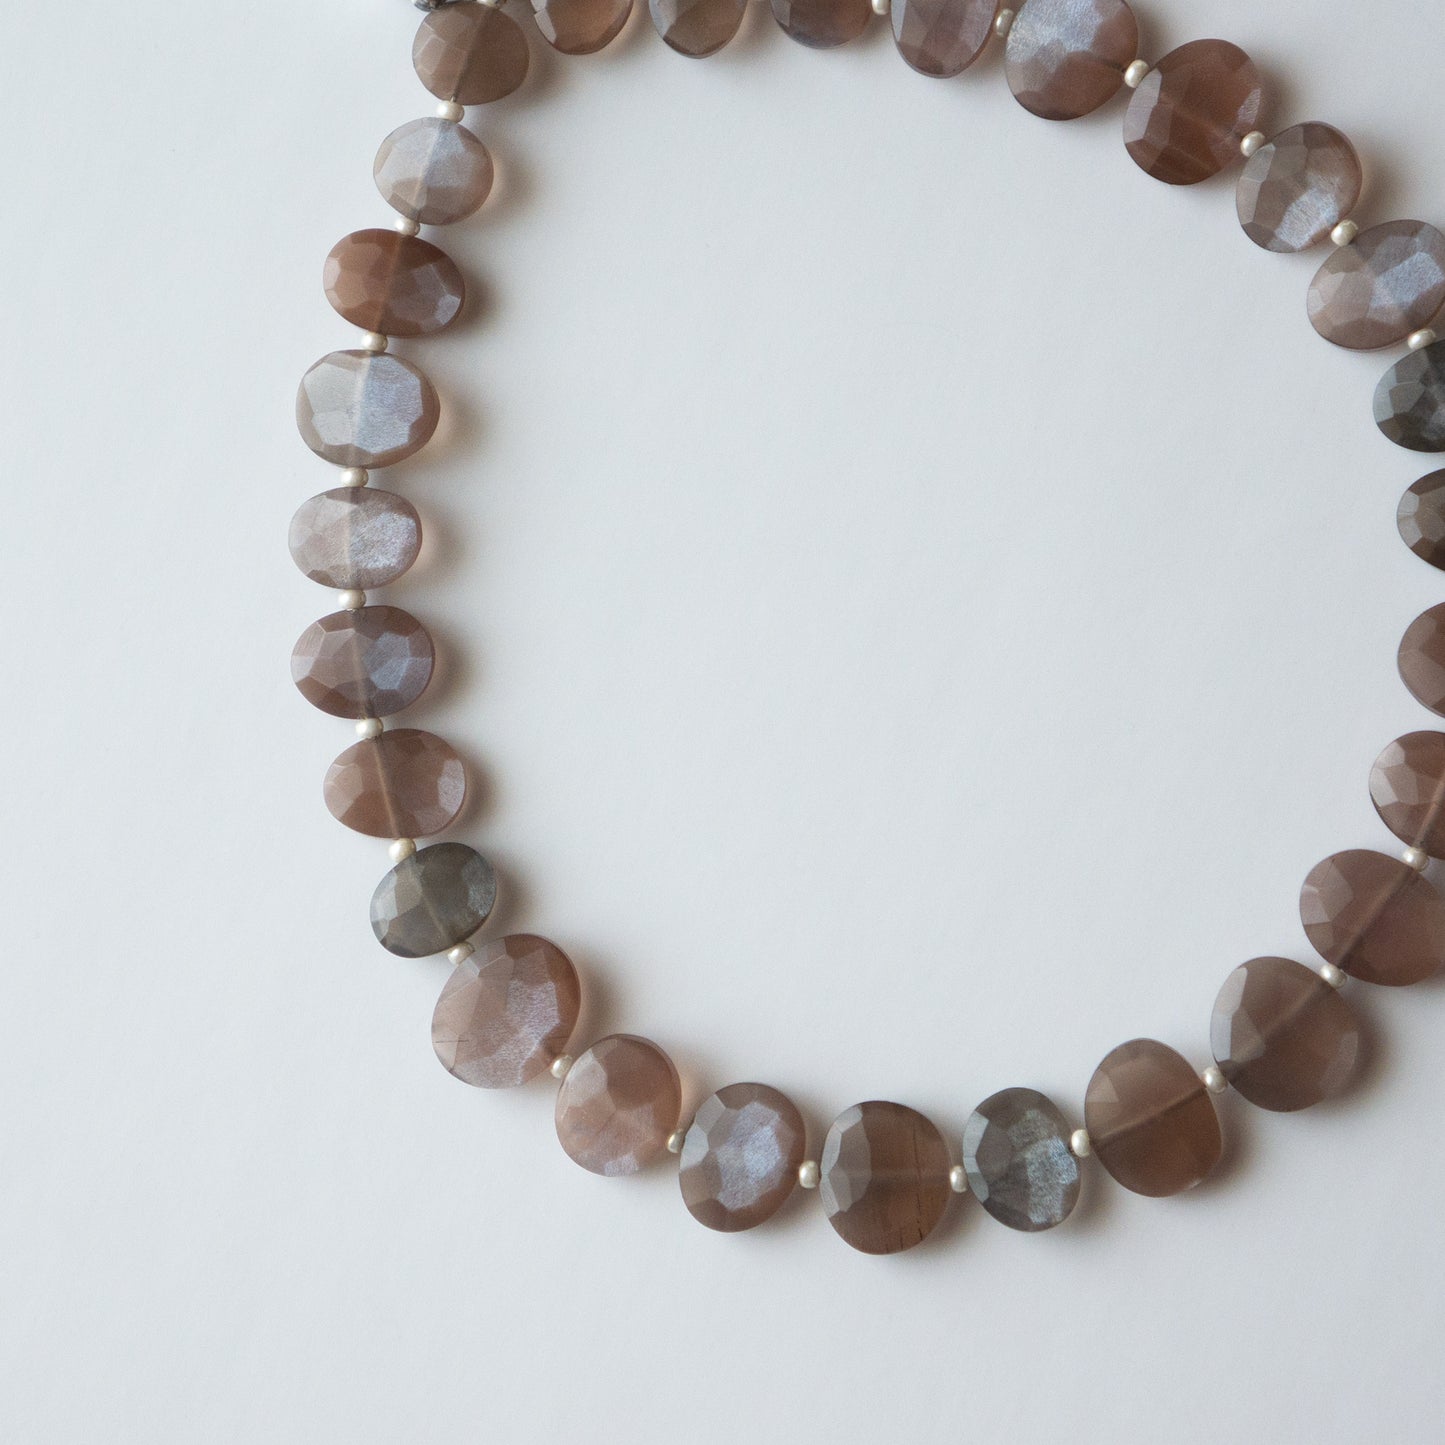 Chocolate Moonstone Uneven Shaped Beads 1Strand